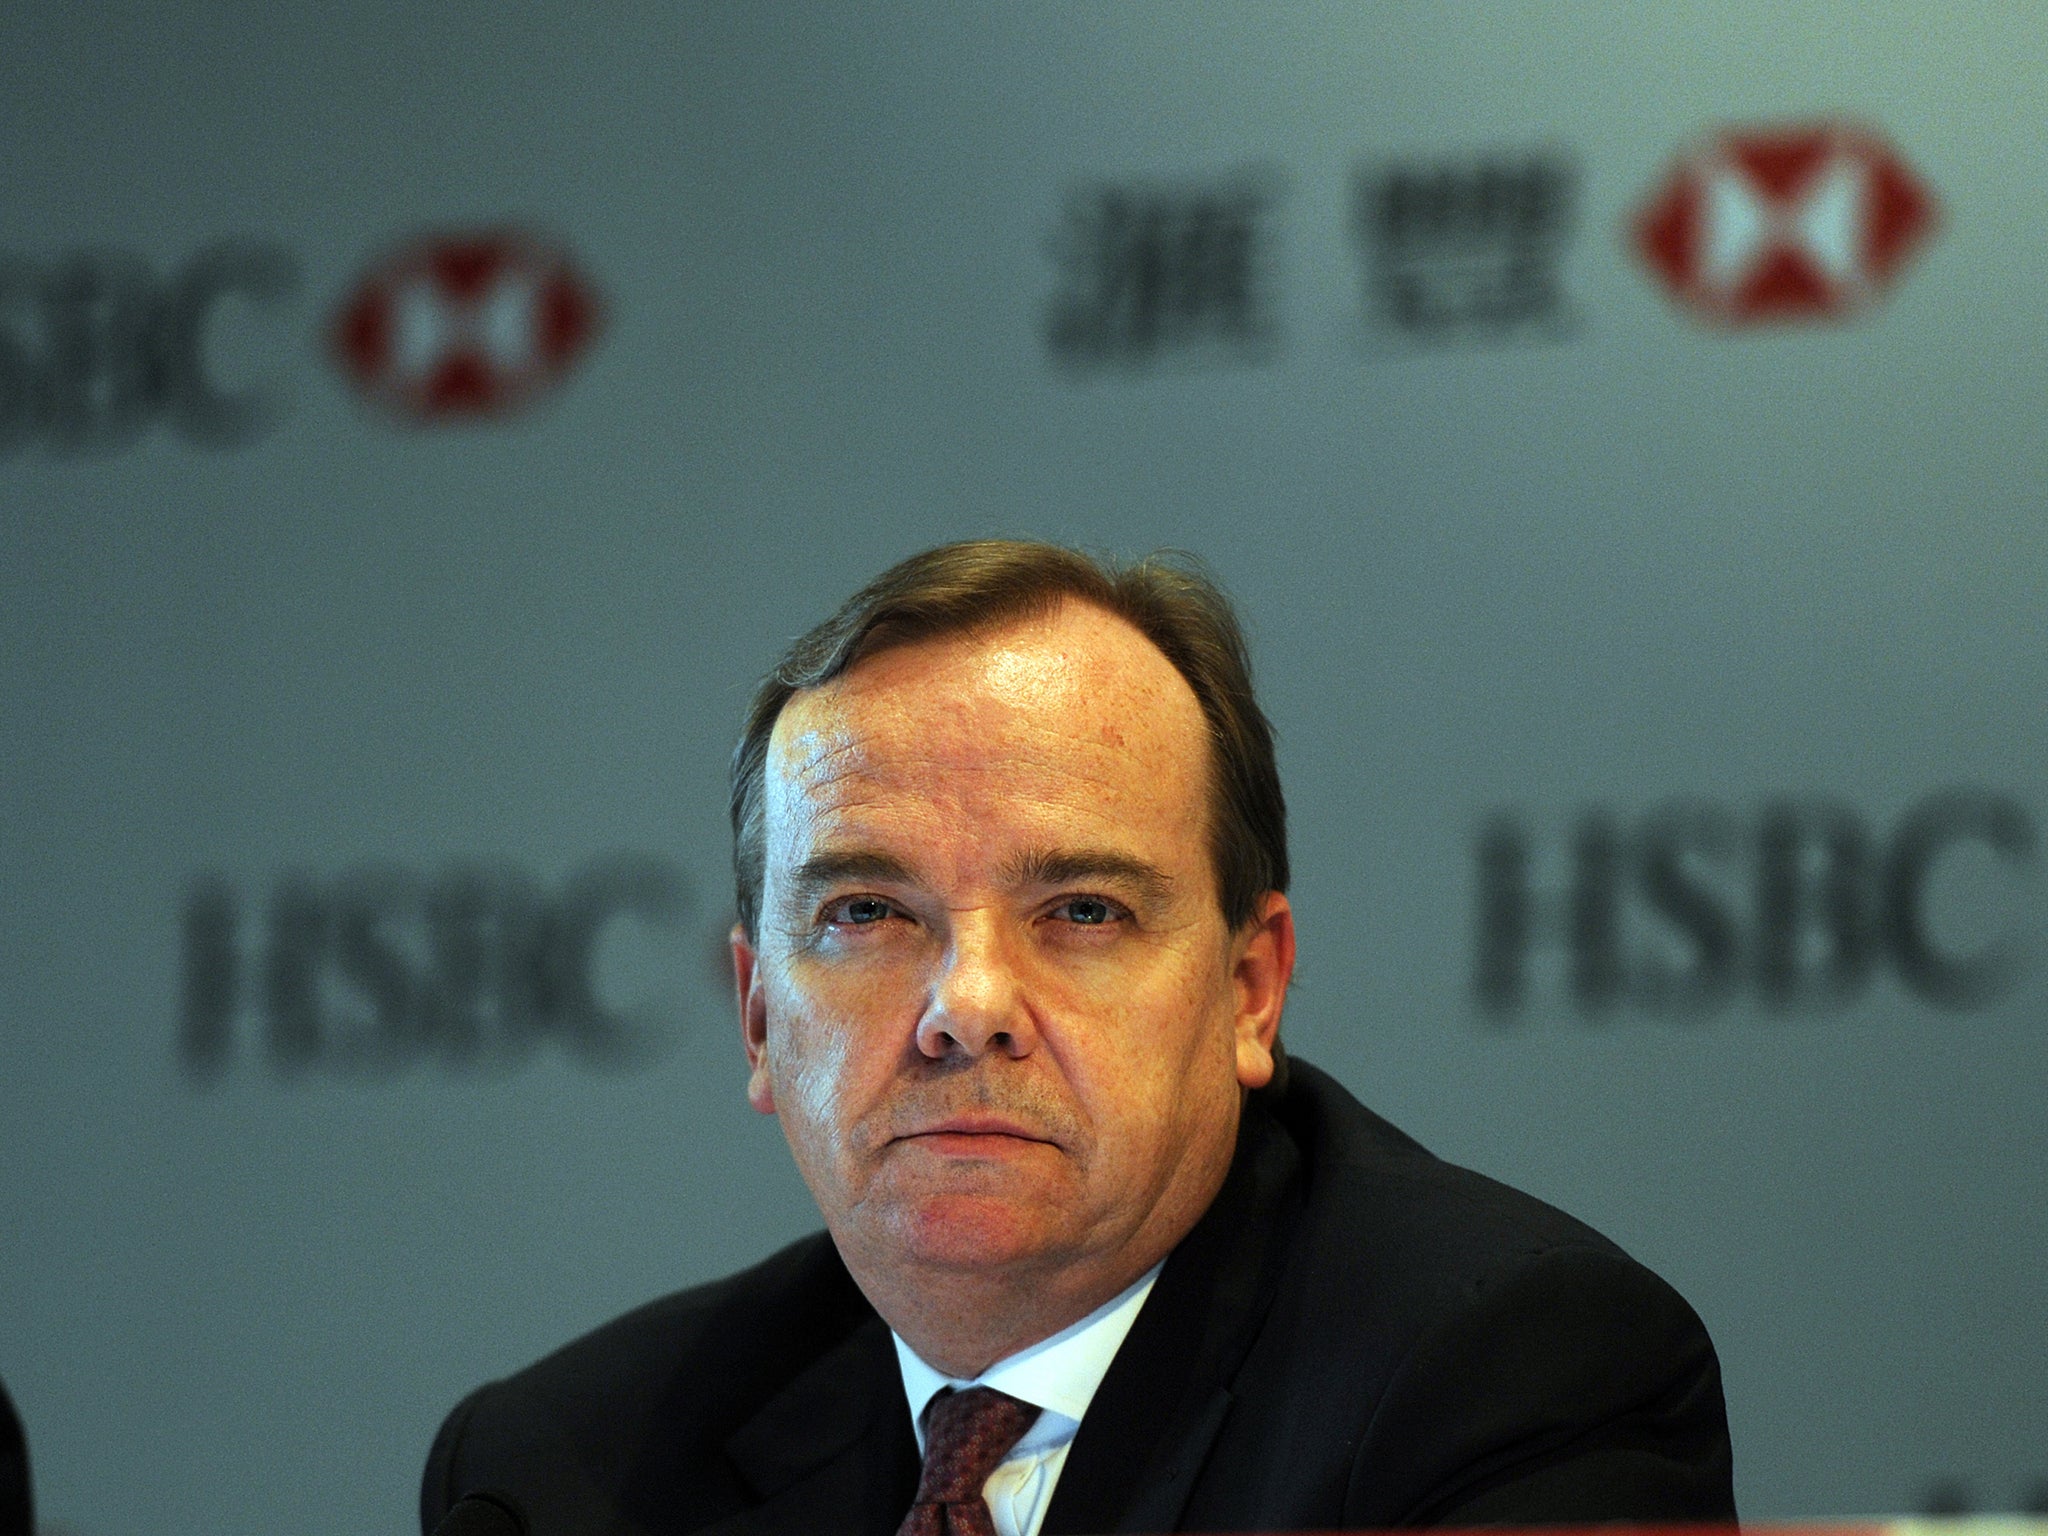 Stuart Gulliver reiterated HSBC’s plans for review of UK base